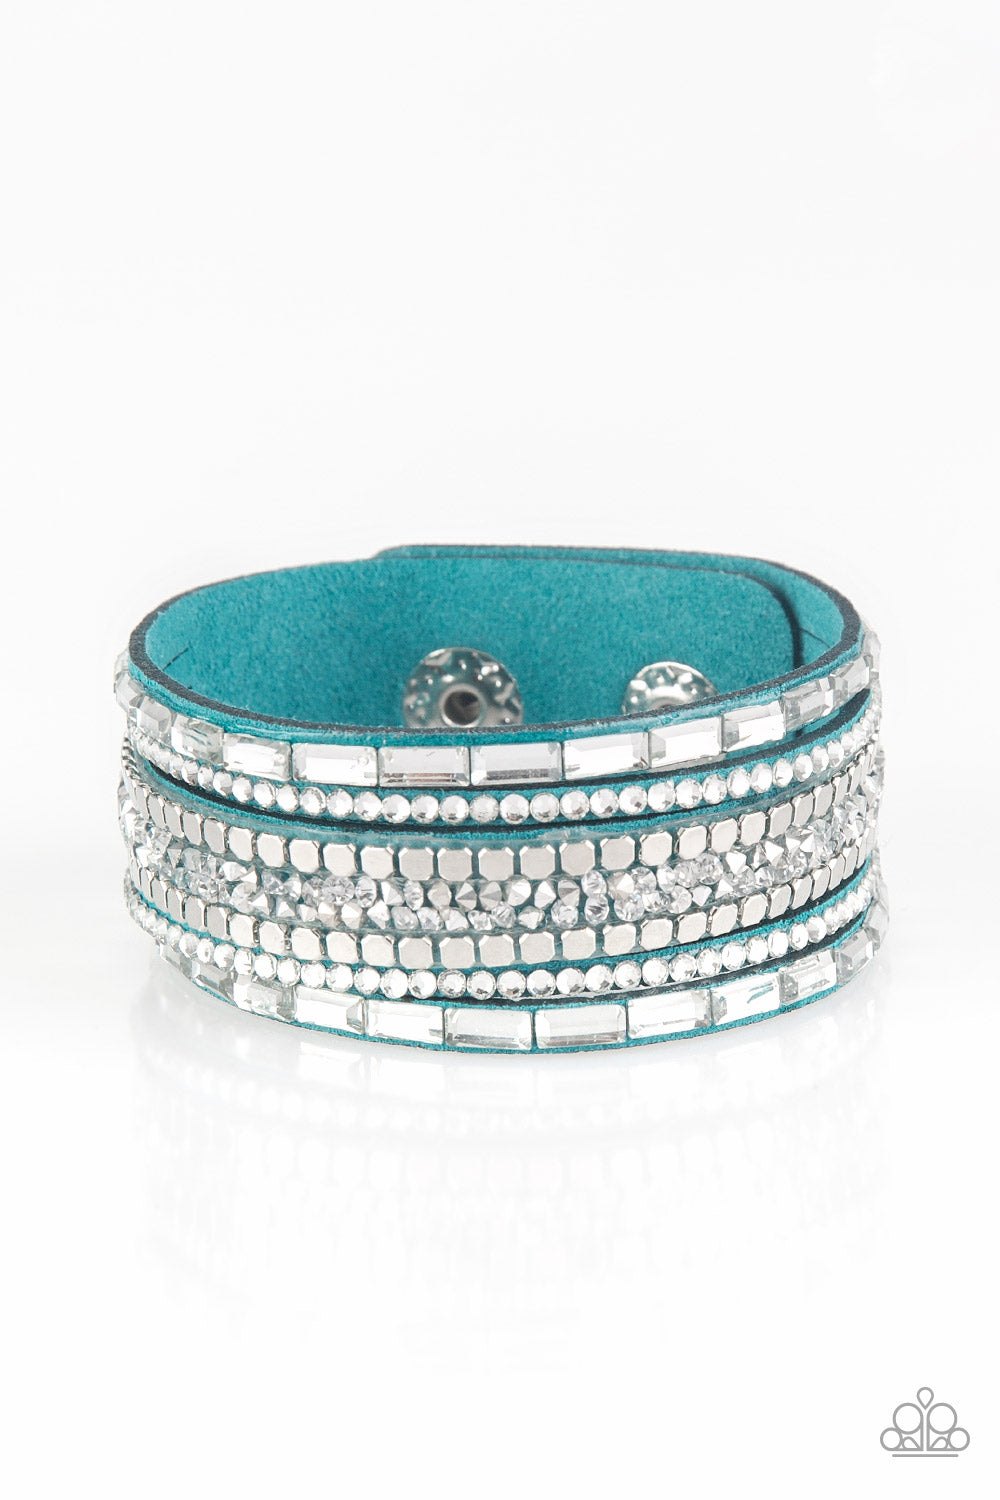 Featuring round and emerald style cuts, glassy white rhinestones join flat silver cubes and metallic prism rhinestones along a blue suede band for a sassy look. Features an adjustable snap closure.